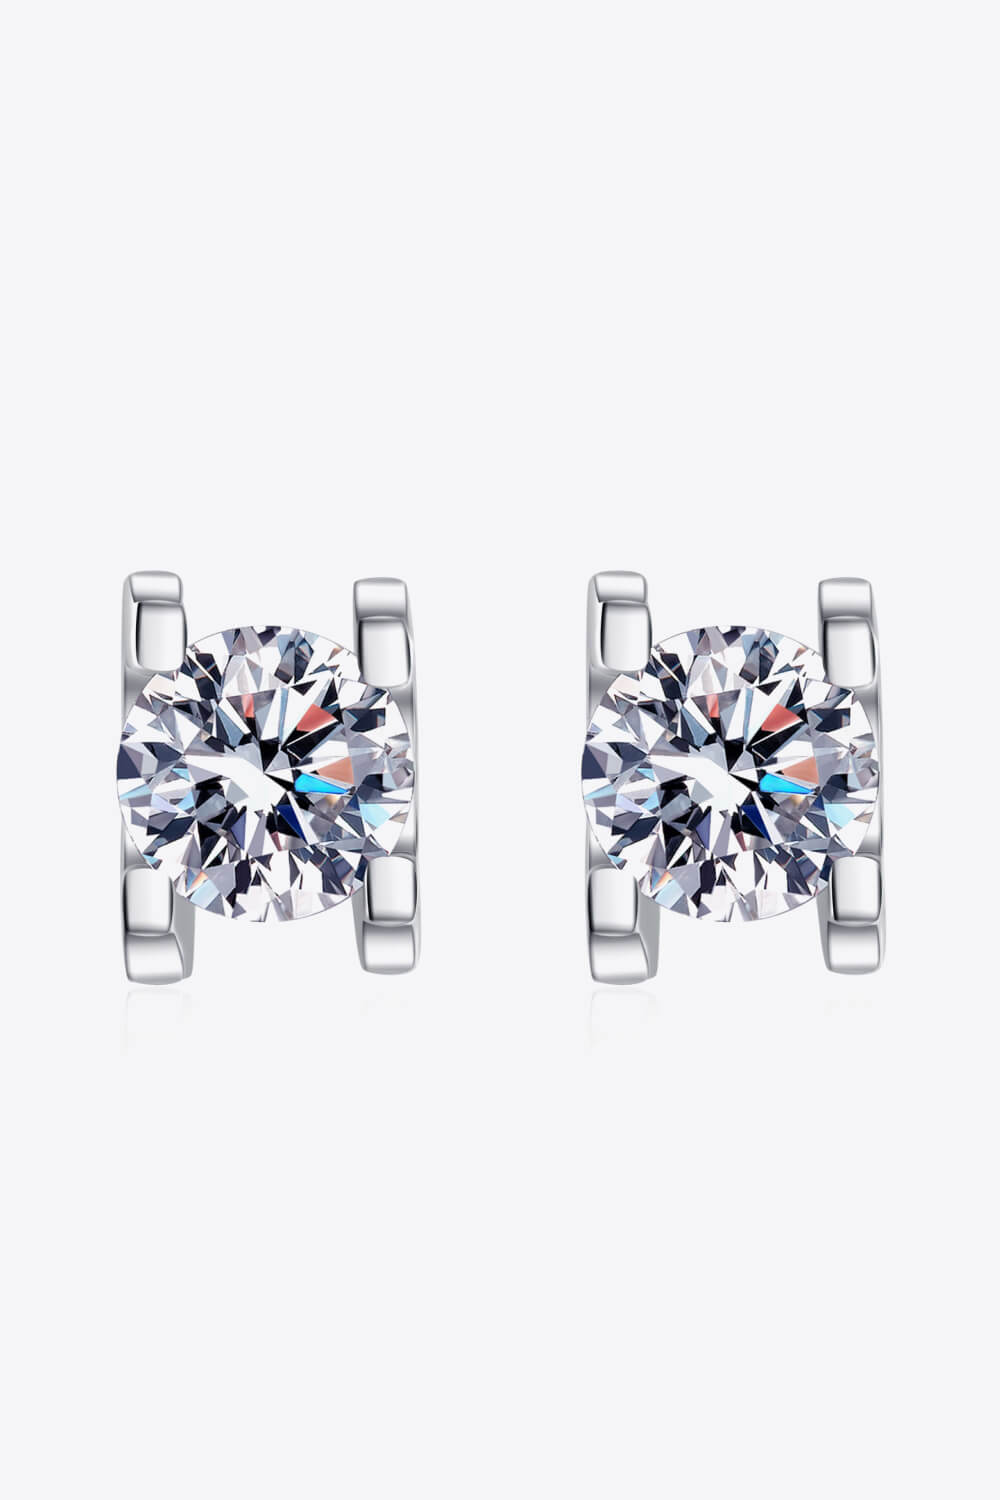 Limitless Love 1 Carat Moissanite Stud Earrings-Earrings-Inspired by Justeen-Women's Clothing Boutique in Chicago, Illinois